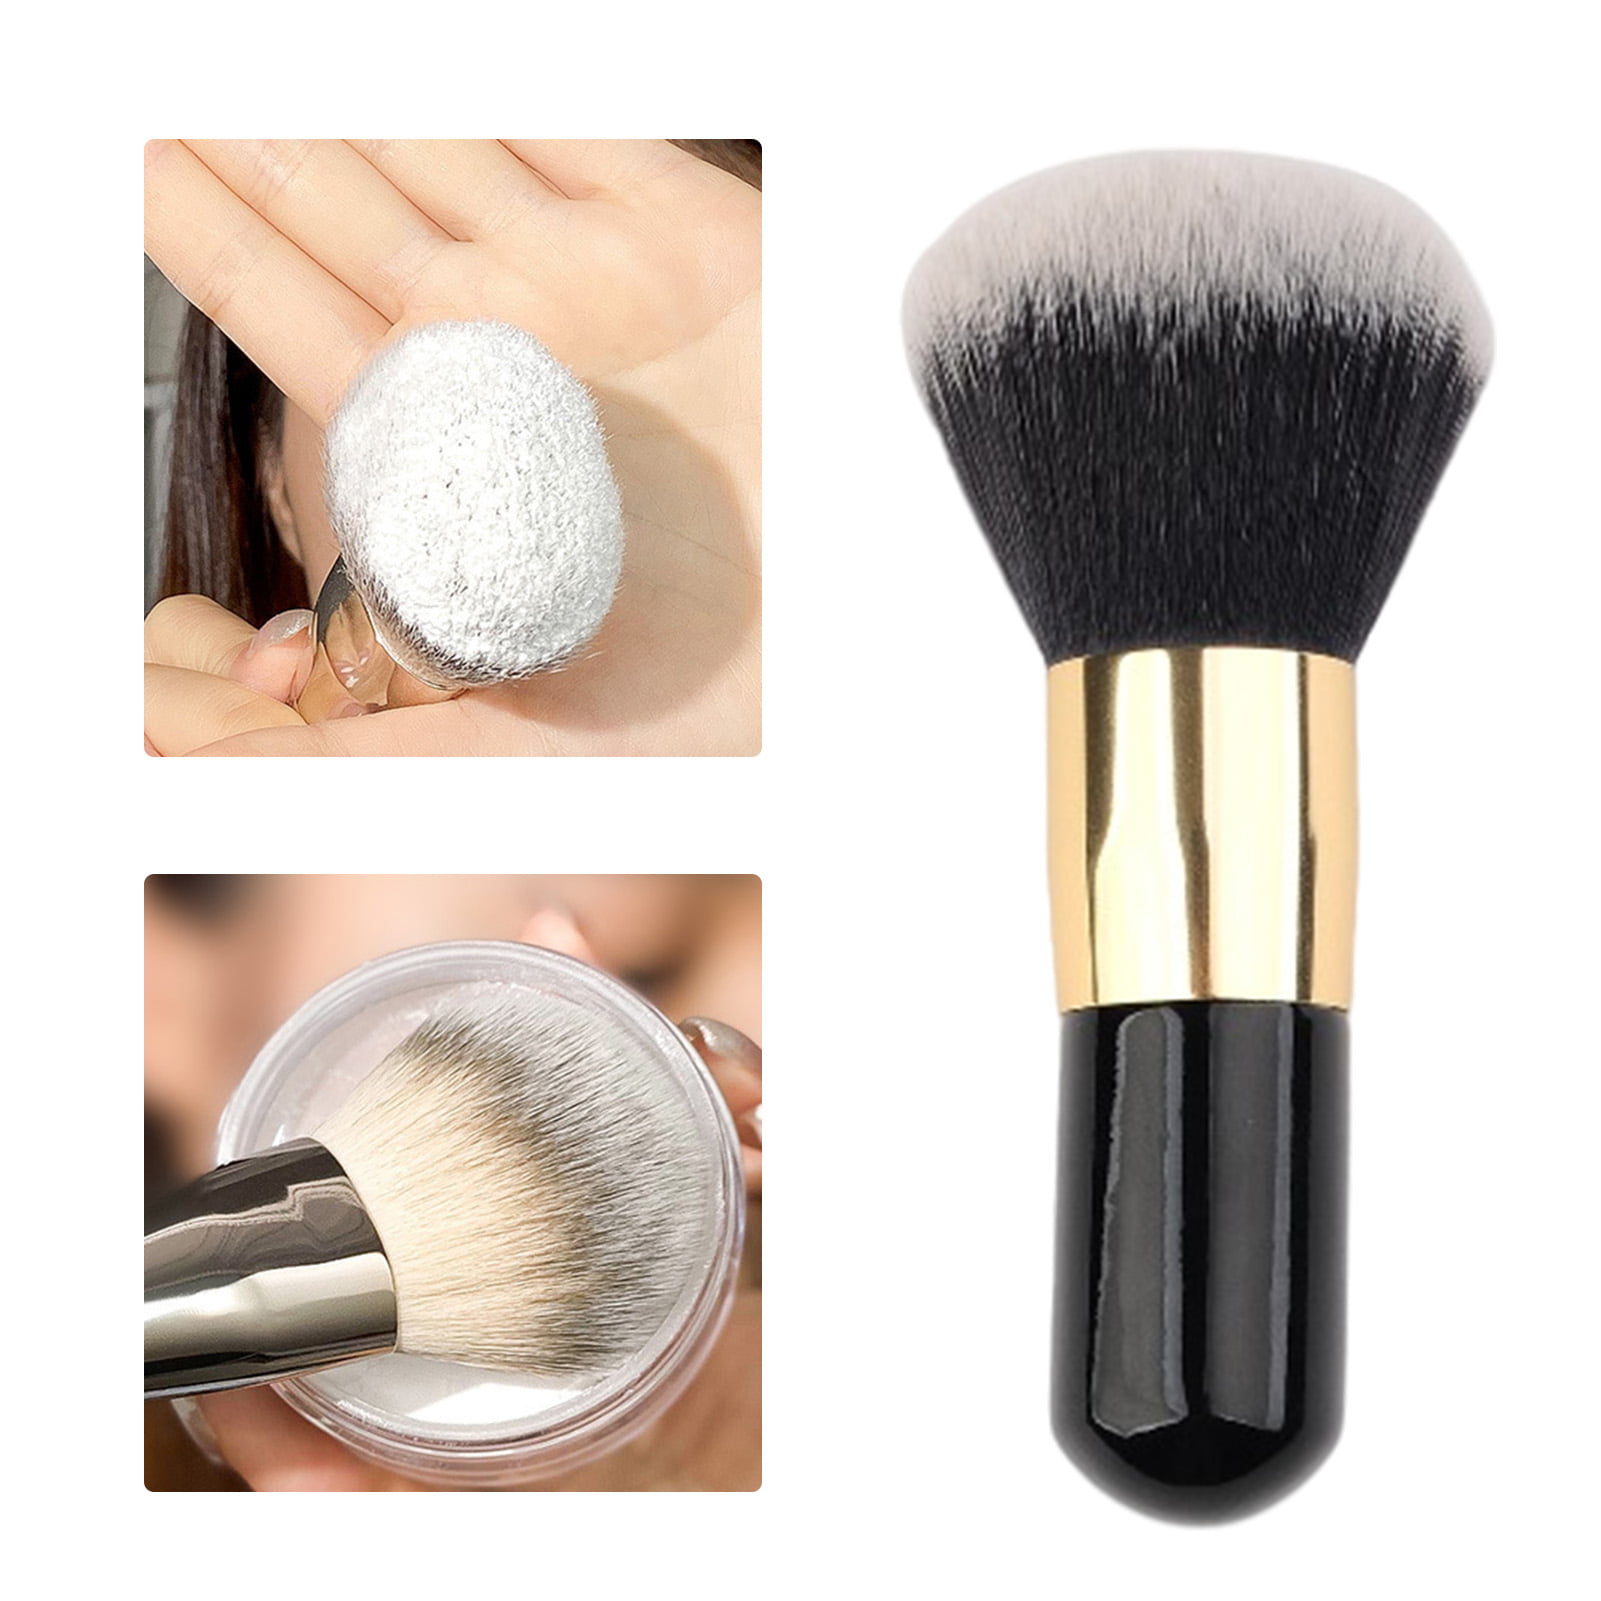 Cintanuota, Adorable Chubby Foundation Brush, 2-Piece Foundation Brush Set,  Multiple Color Options, Portable Travel Makeup Brush for Blending Cream,  Liquid or Flawless Powder Makeup (pink + black)